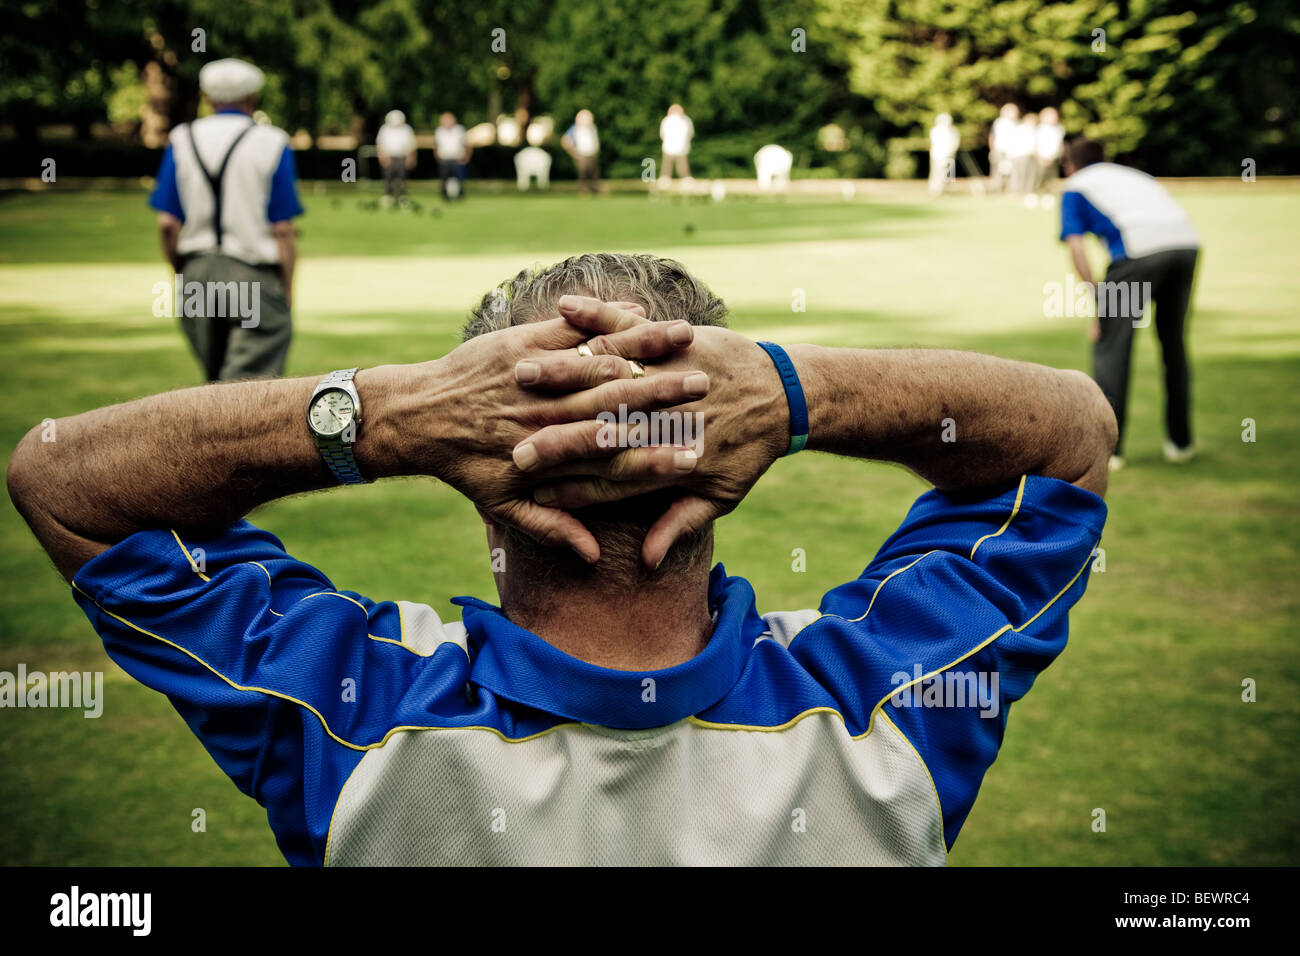 A Lawn Bowls player  with hands crossed behind head watches a bowling tournament at Southwark Park Club London SE1 Stock Photo